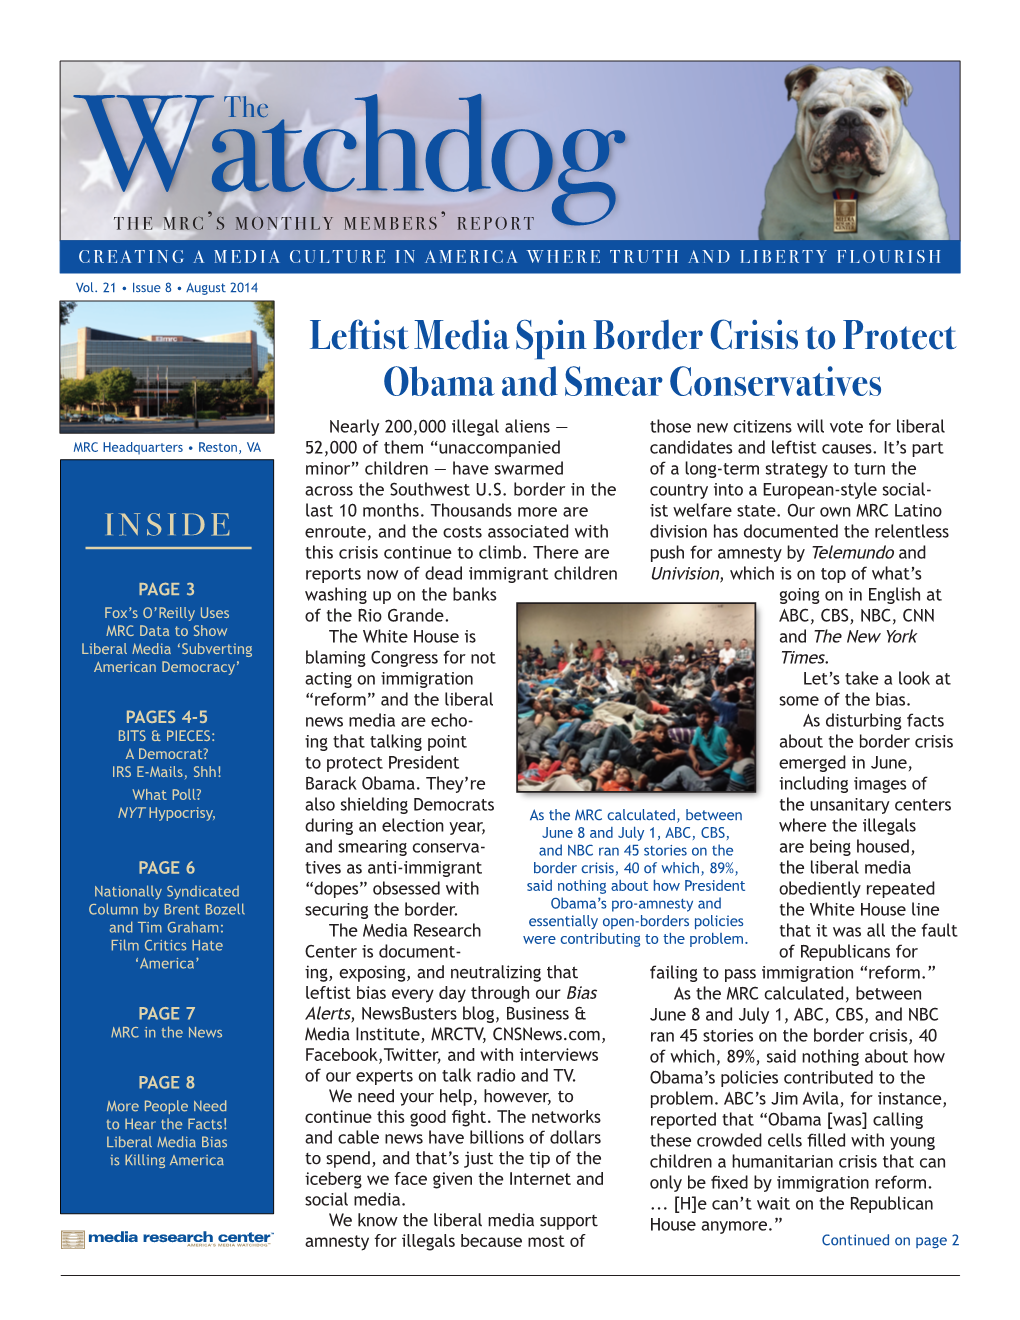 Leftist Media Spin Border Crisis to Protect Obama and Smear